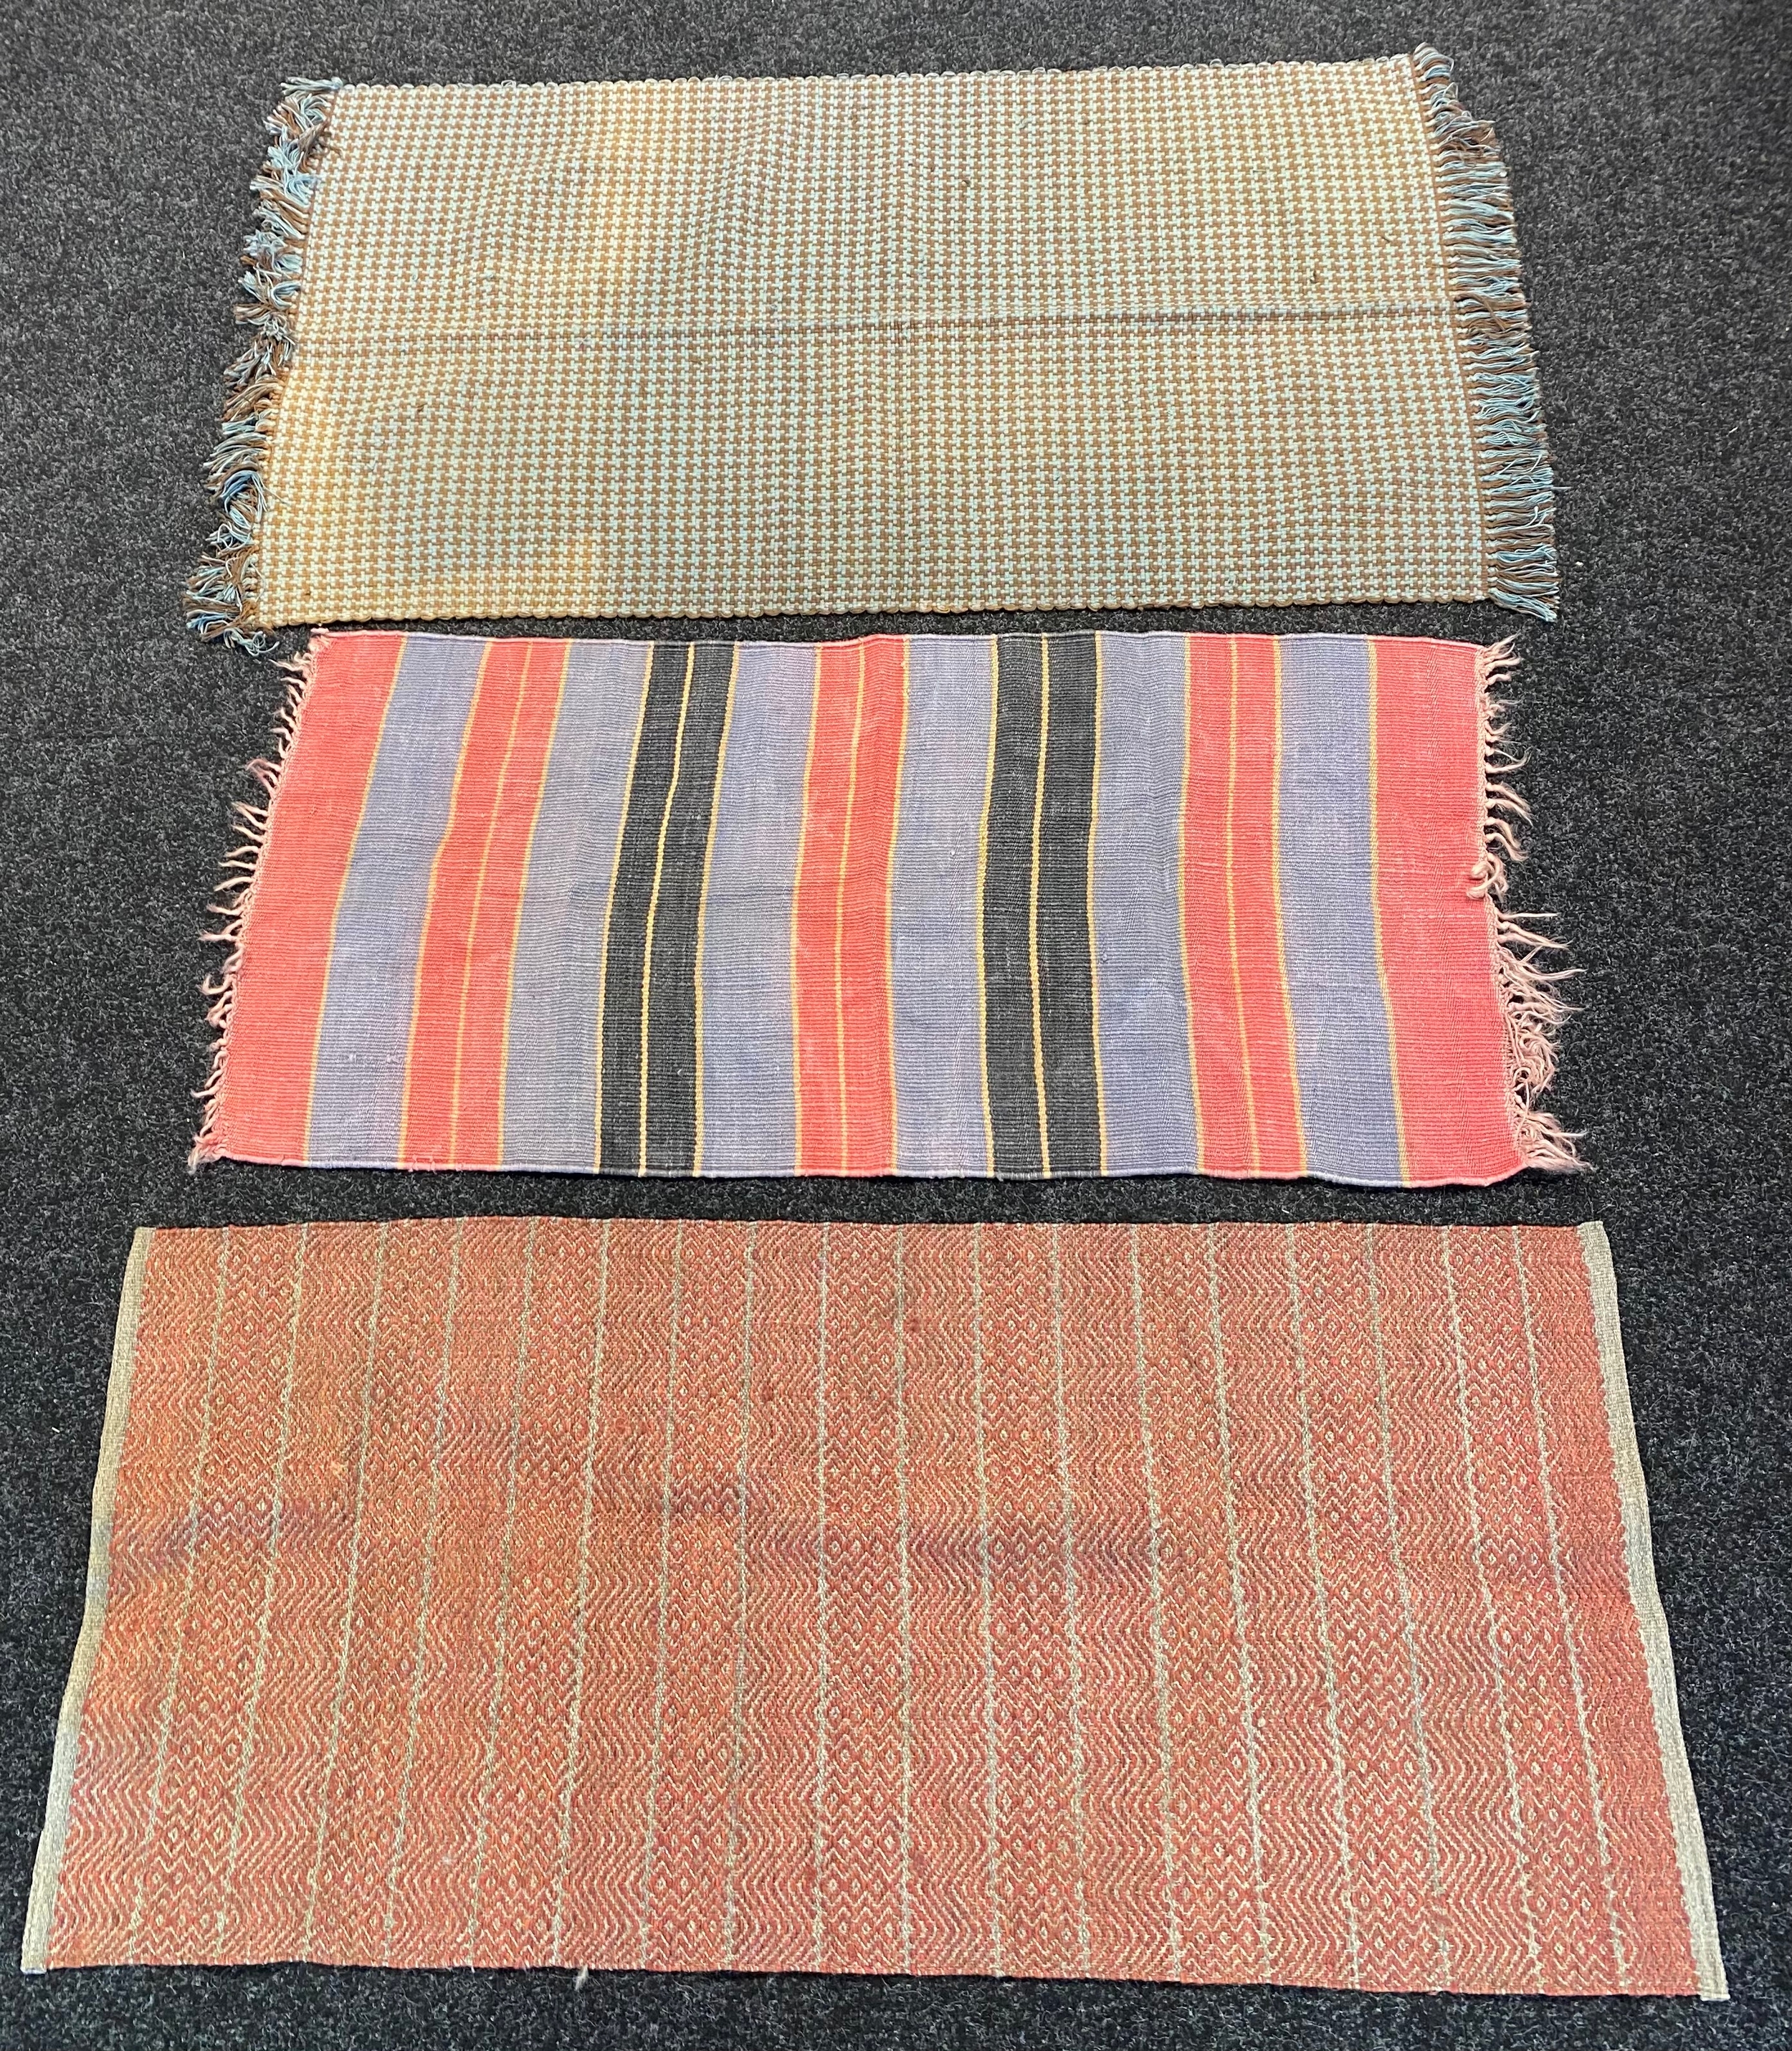 Three vintage rugs to include Pier 1 Imports handwoven rug